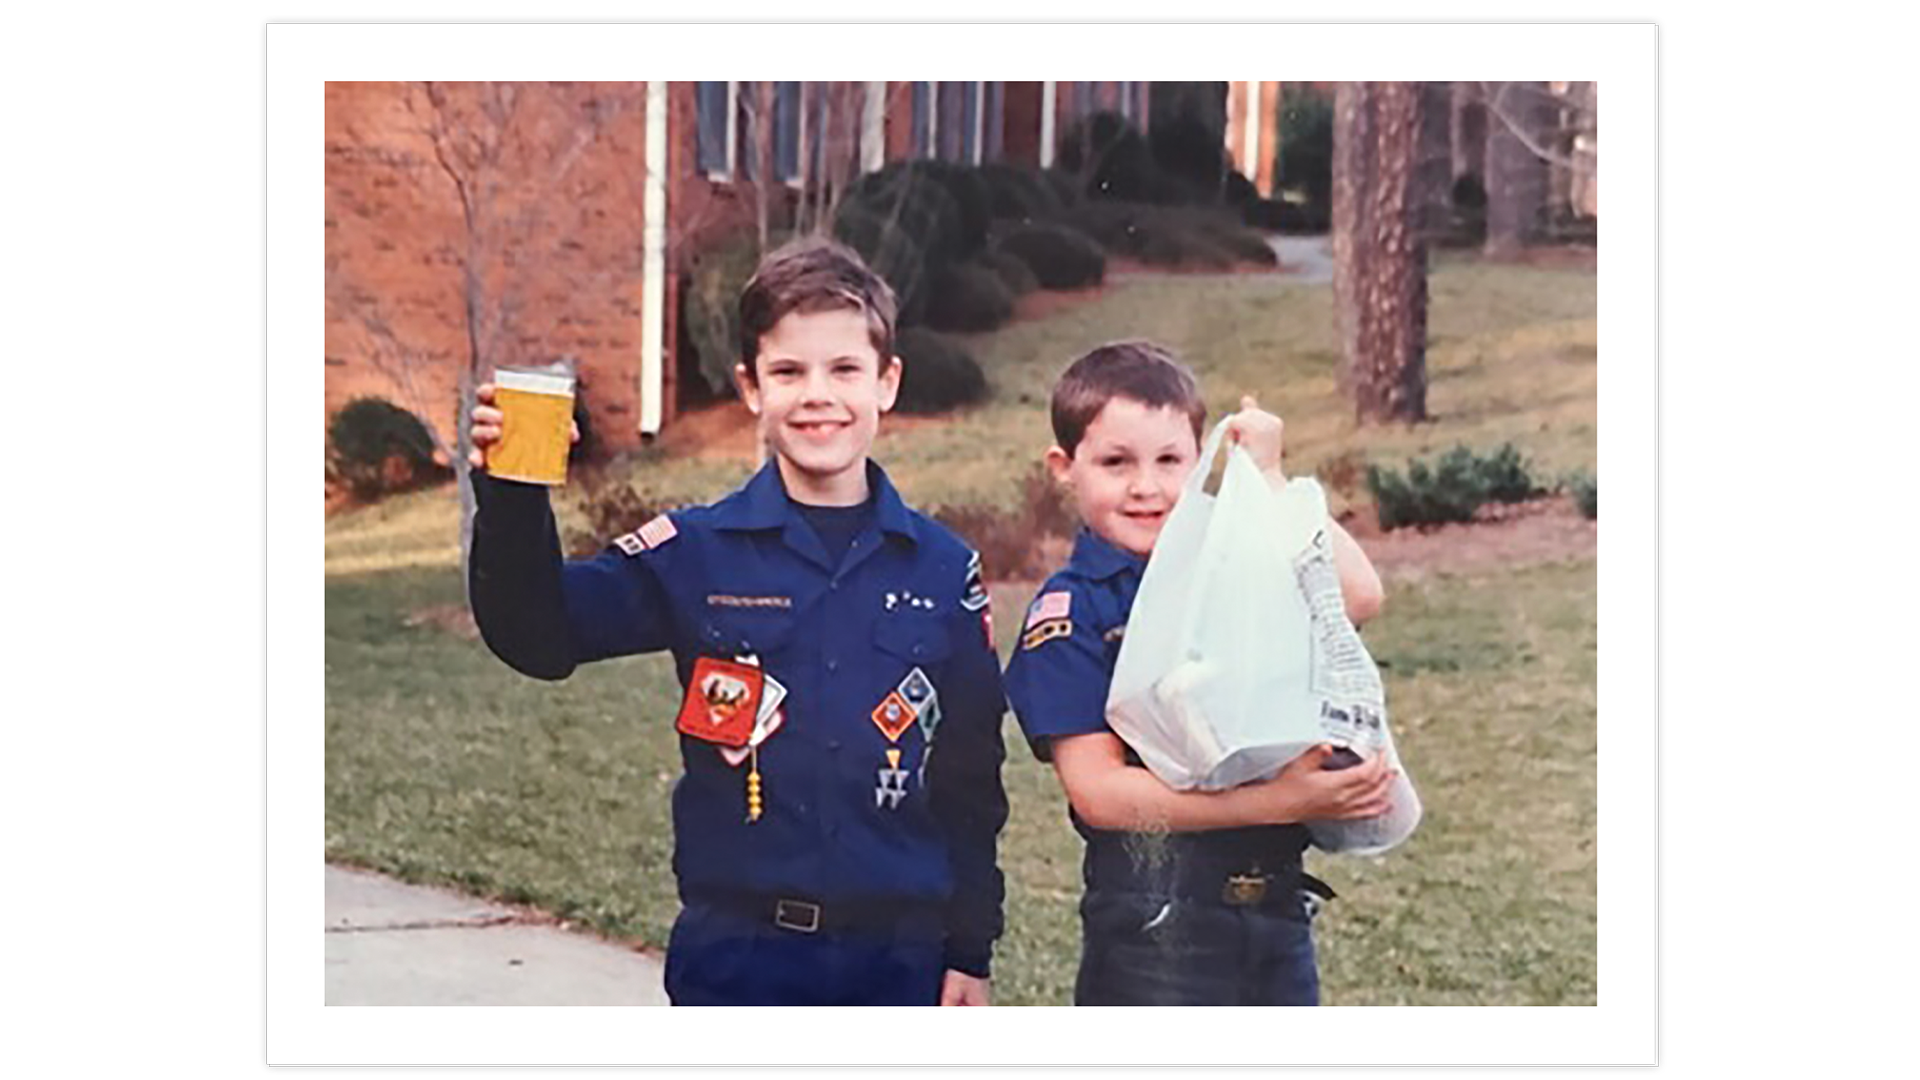 Grant Lackey, left, started out as a Cub Scout, then later met David Menna through a church-affiliated Boy Scout troop.